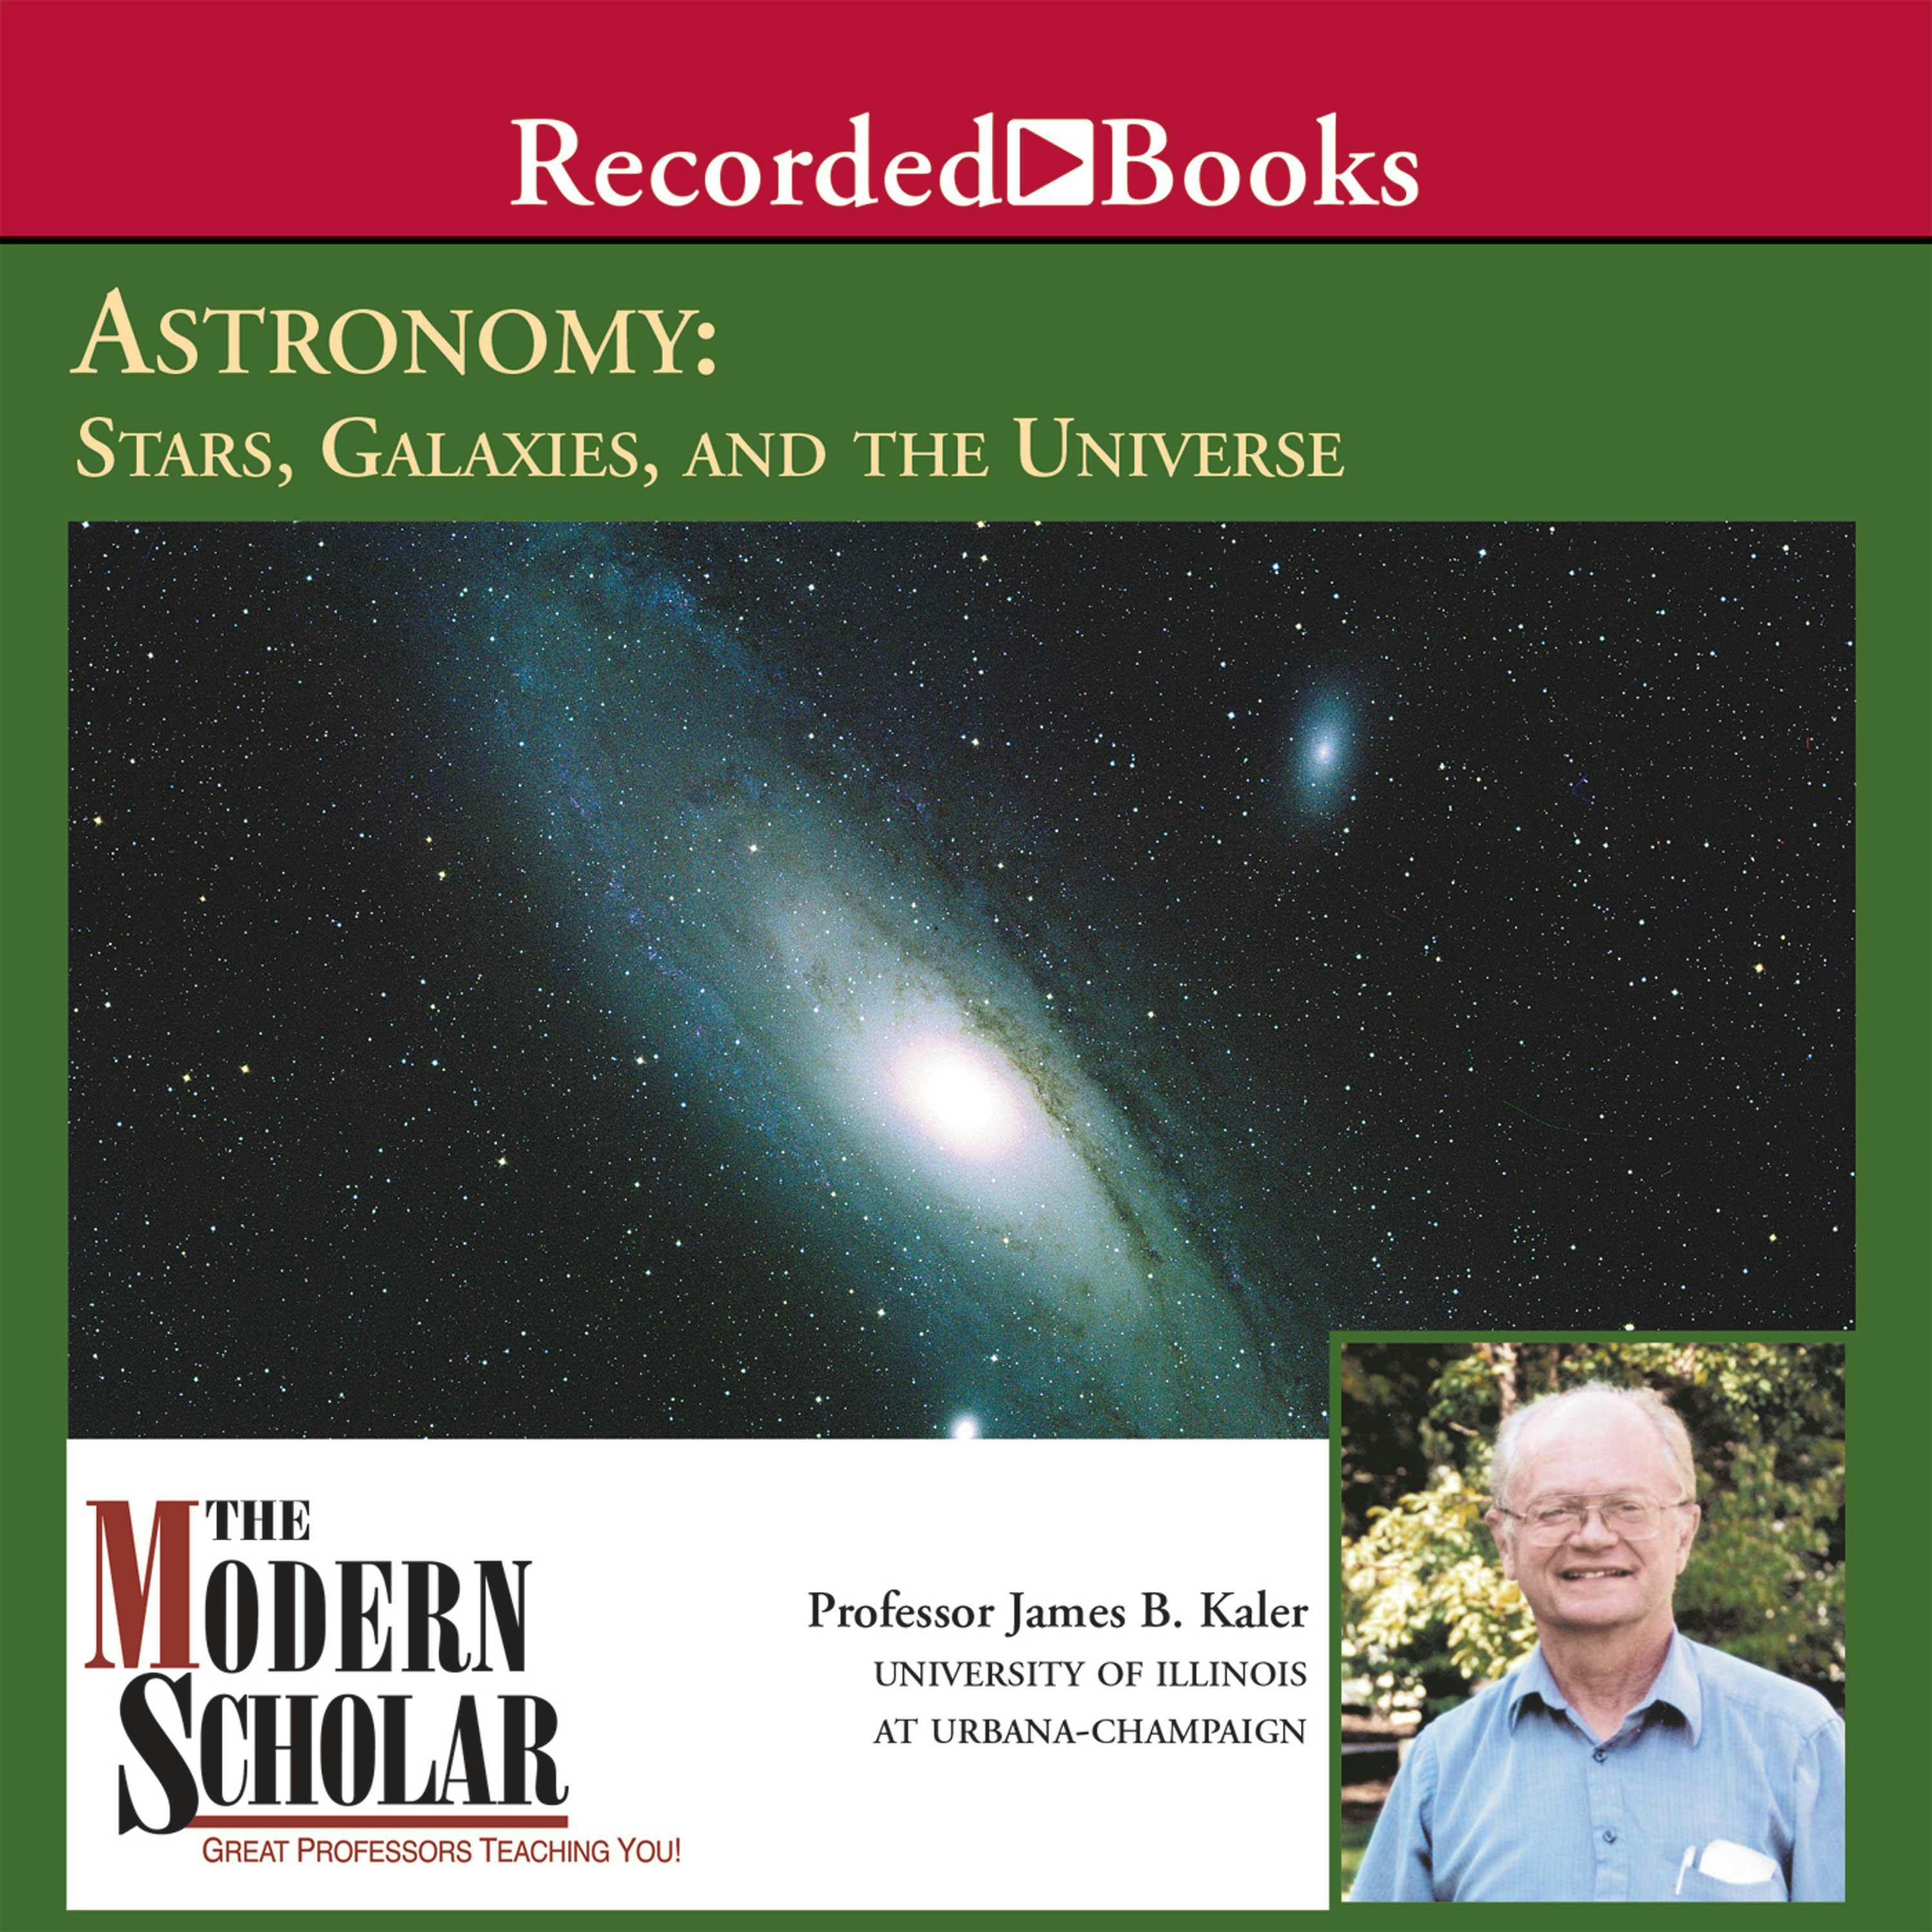 Astronomy II: Stars, Galaxies, and the Universe - undefined